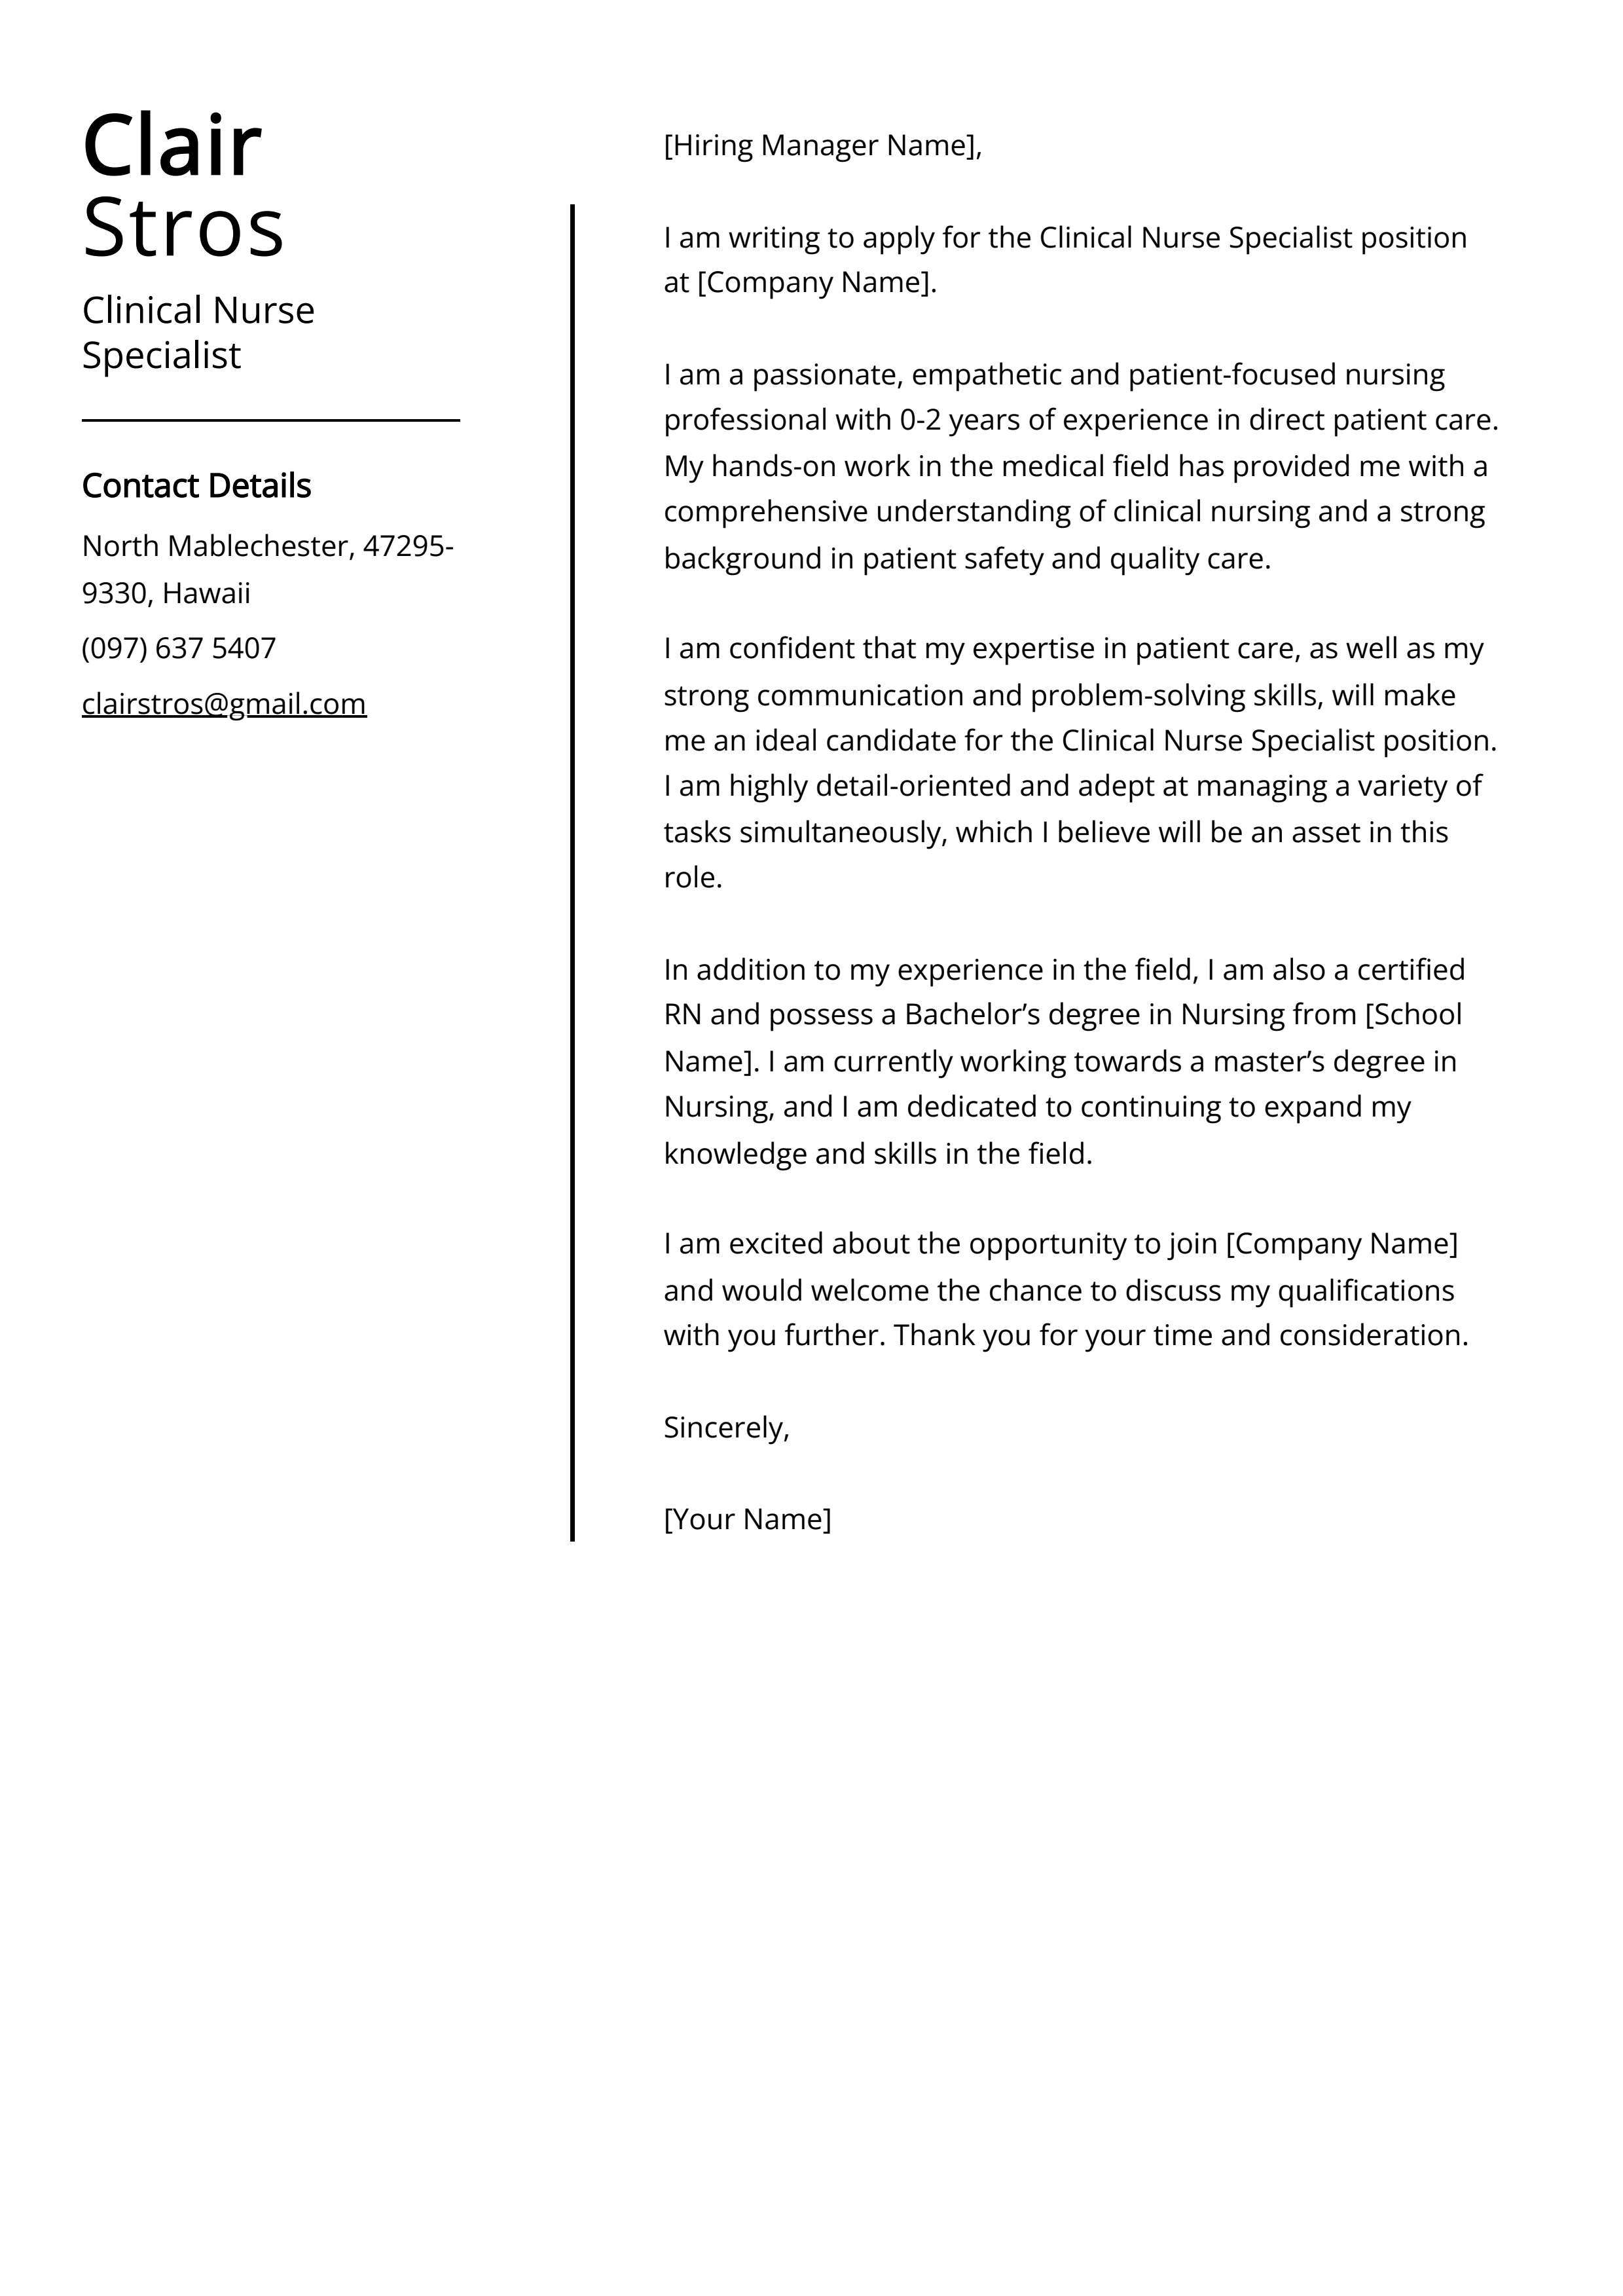 Clinical Nurse Specialist Cover Letter Example